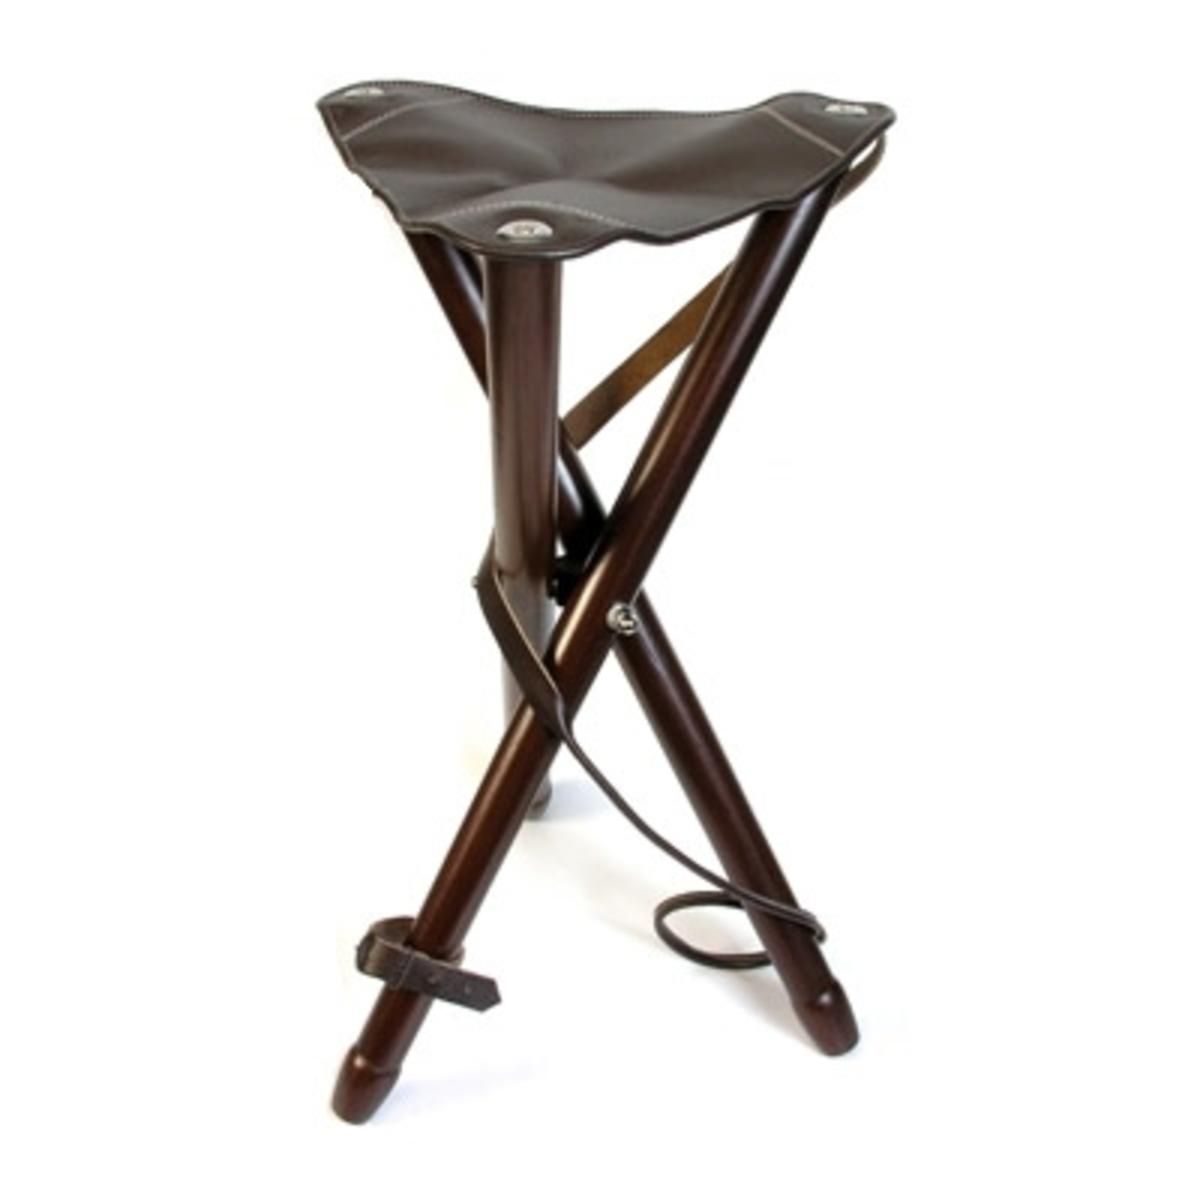 Napier Leather Tripod Stool Brown | Ebay Within Medium Brown Leather Folding Stools (View 14 of 20)